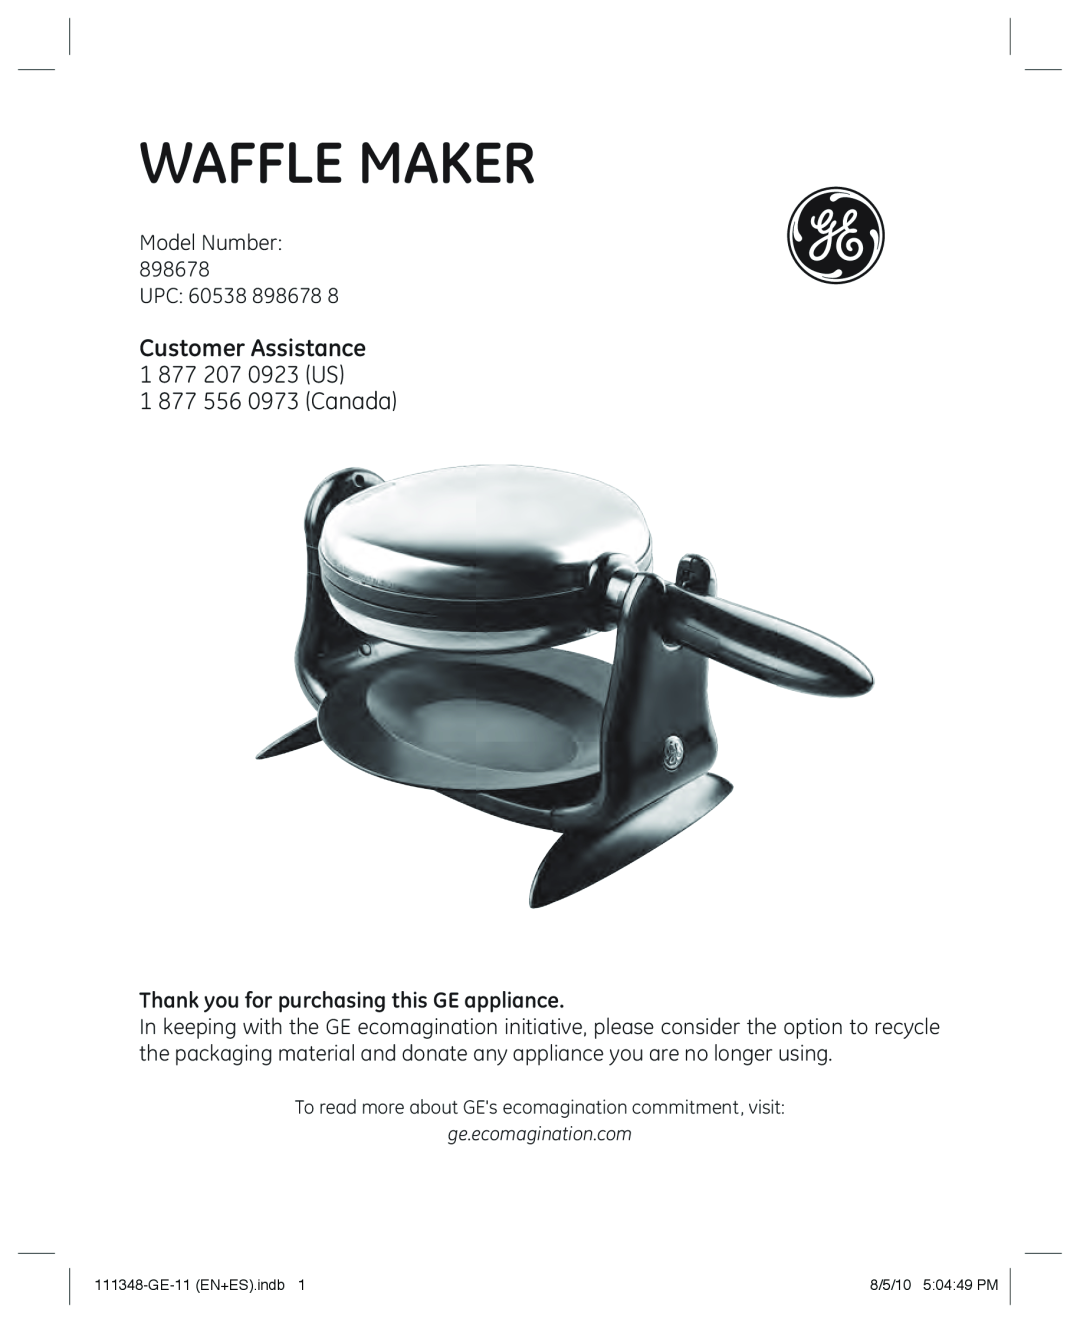 GE 898678 manual Customer Assistance 1 877 207 0923 US, Thank you for purchasing this GE appliance, Waffle maker 